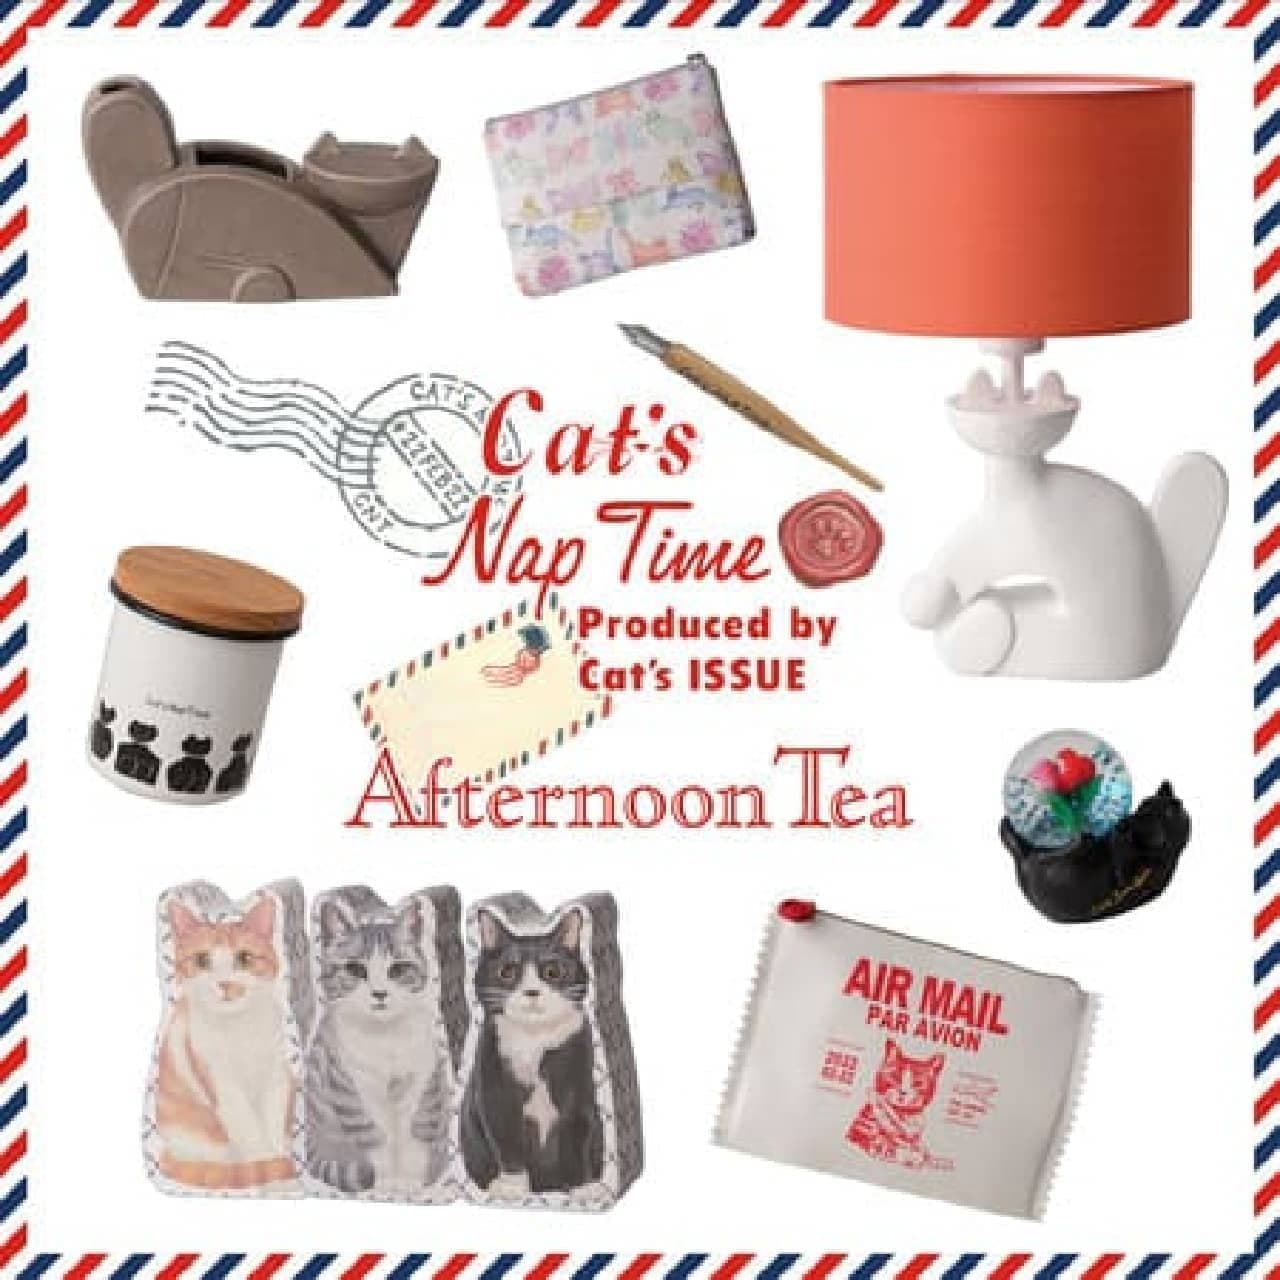 Afternoon Tea LIVING "Cat's NapTime produced by Cat's ISSUE" - Various goods by cat-loving creators! Part of the proceeds will be donated.